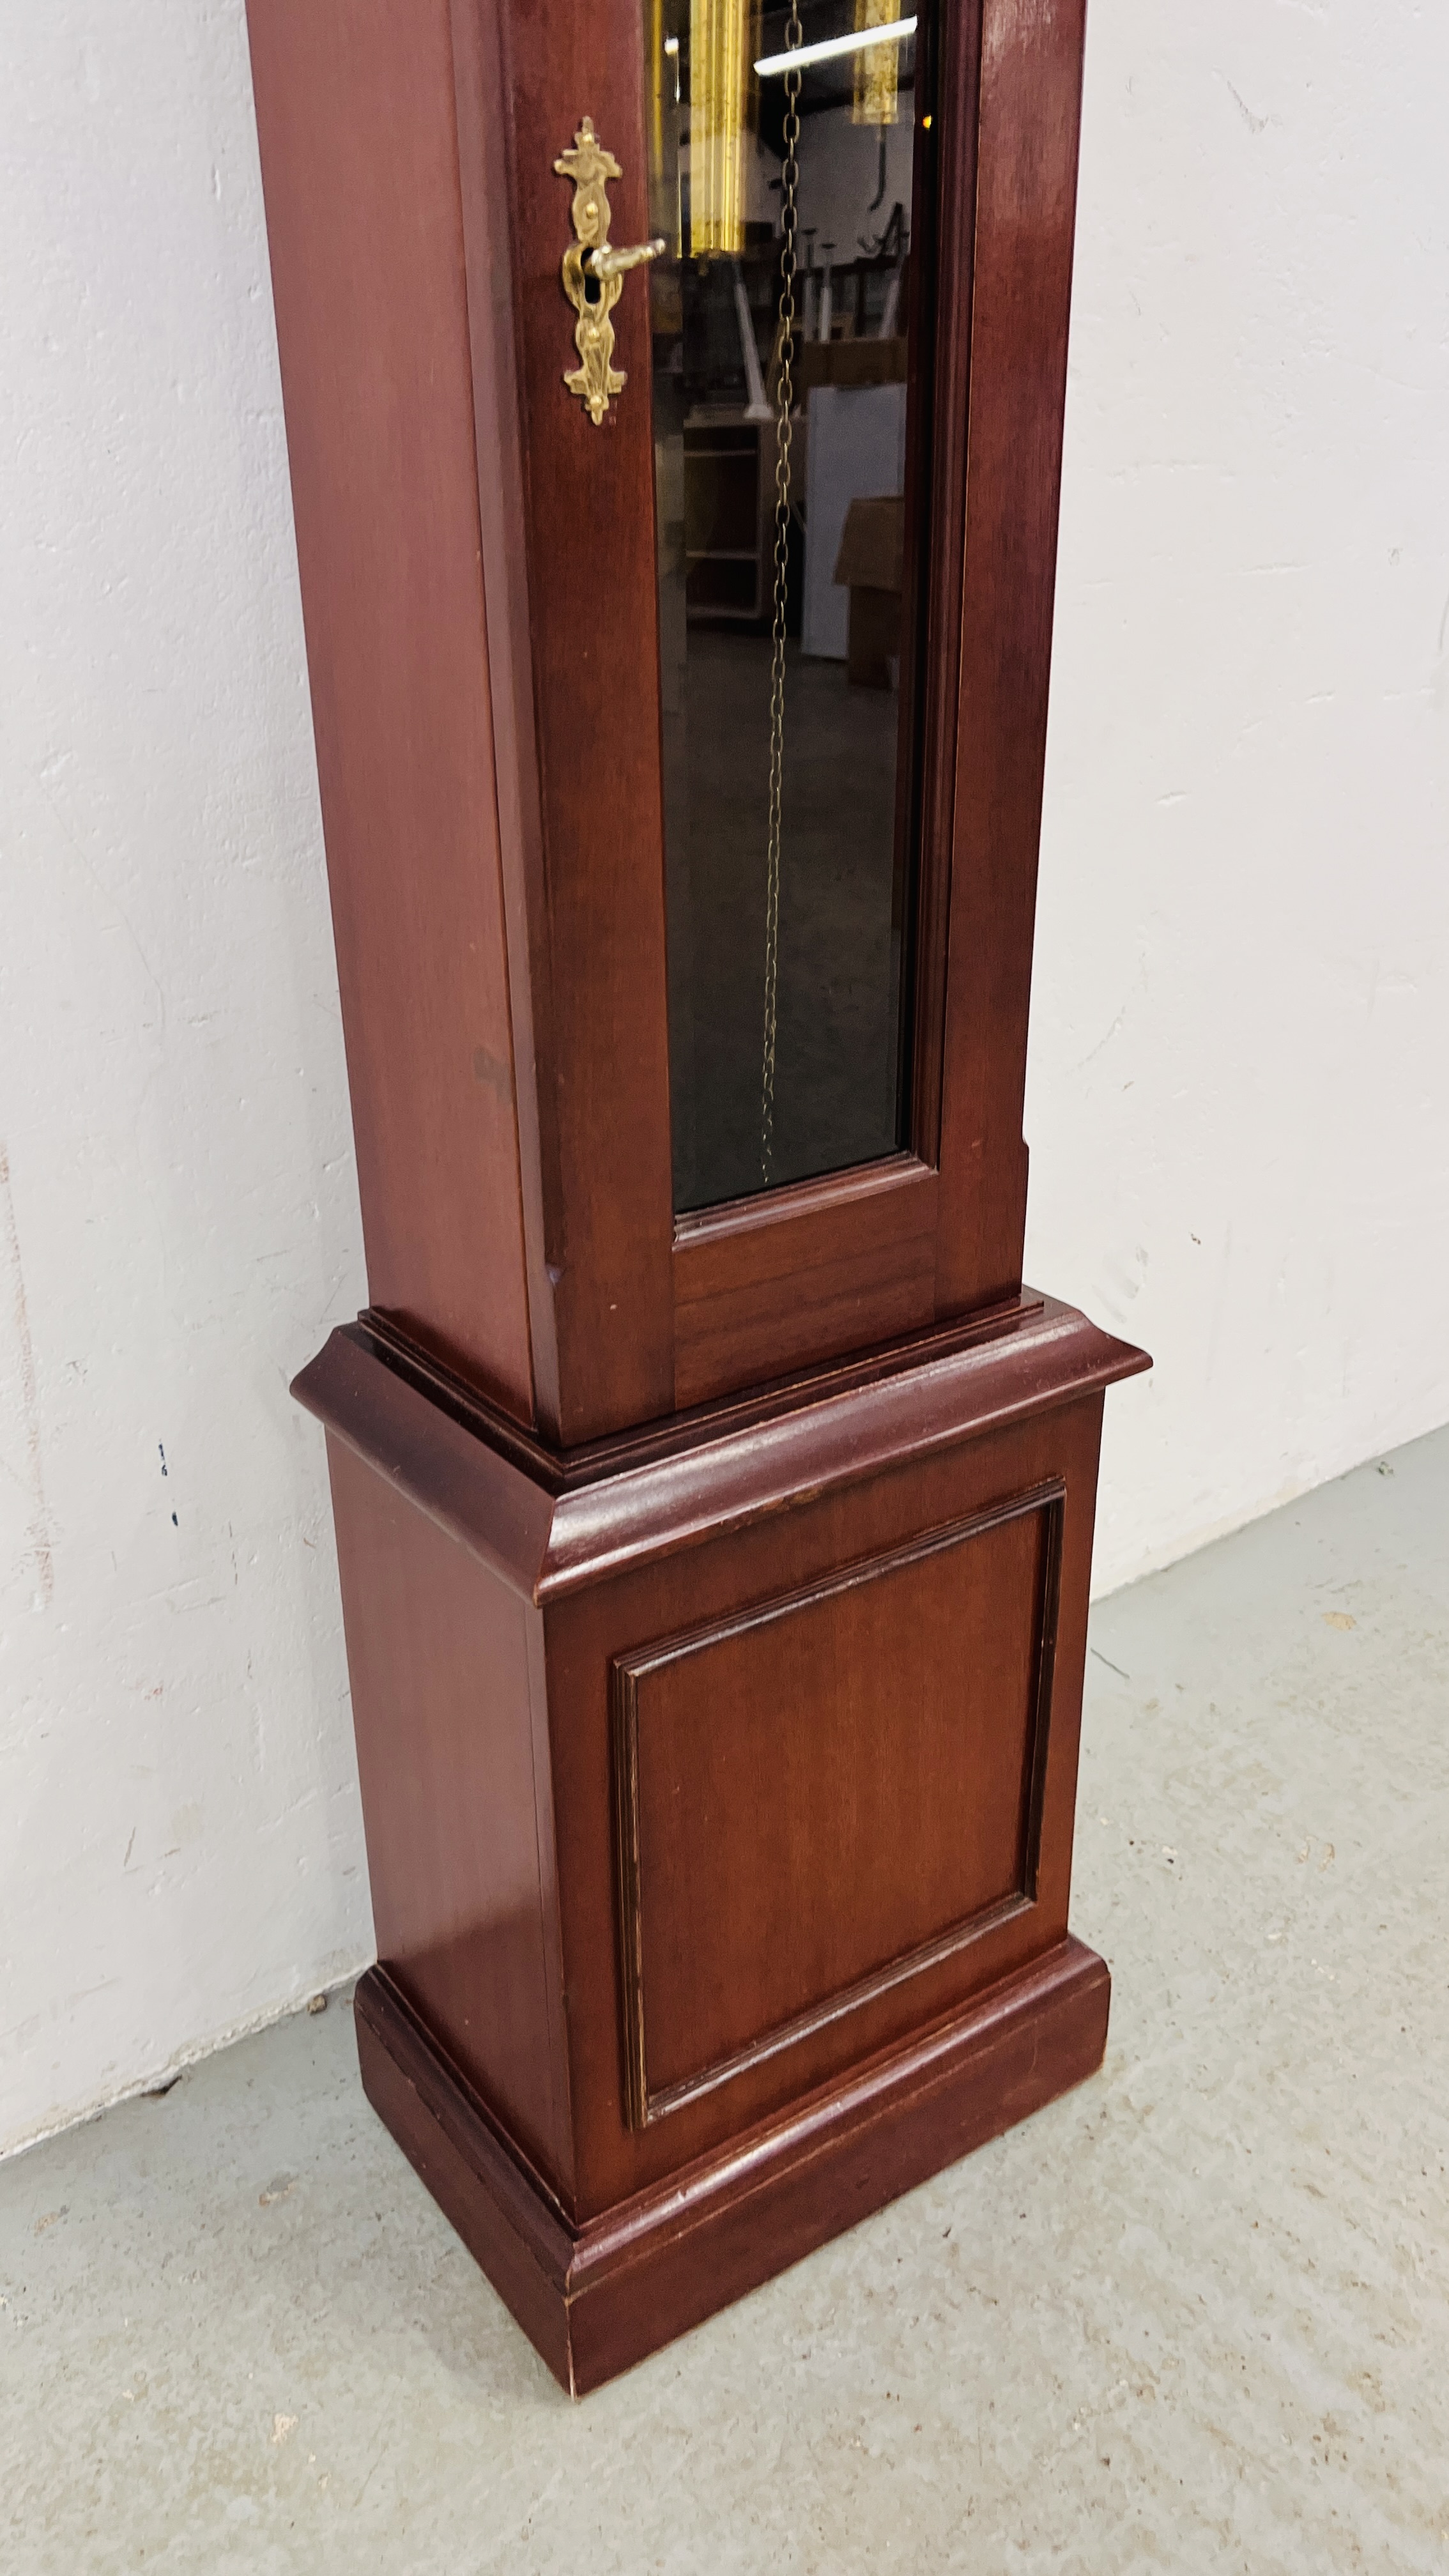 A REPRODUCTION MAHOGANY CASED GRANDMOTHER CLOCK THE DIAL MARKED TEMPESTFUGIT HEIGHT 162CM. - Image 7 of 10